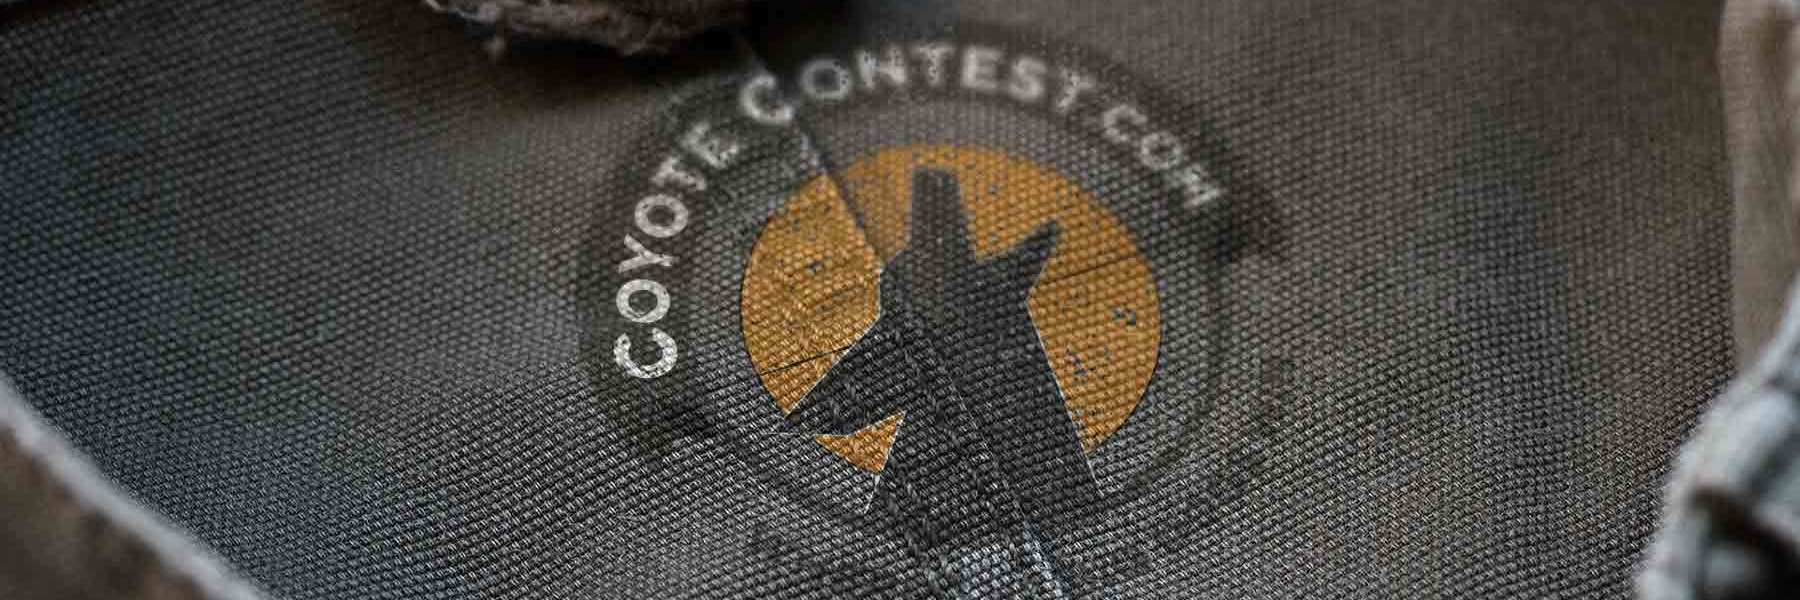 Coyote Contest logo on shirt